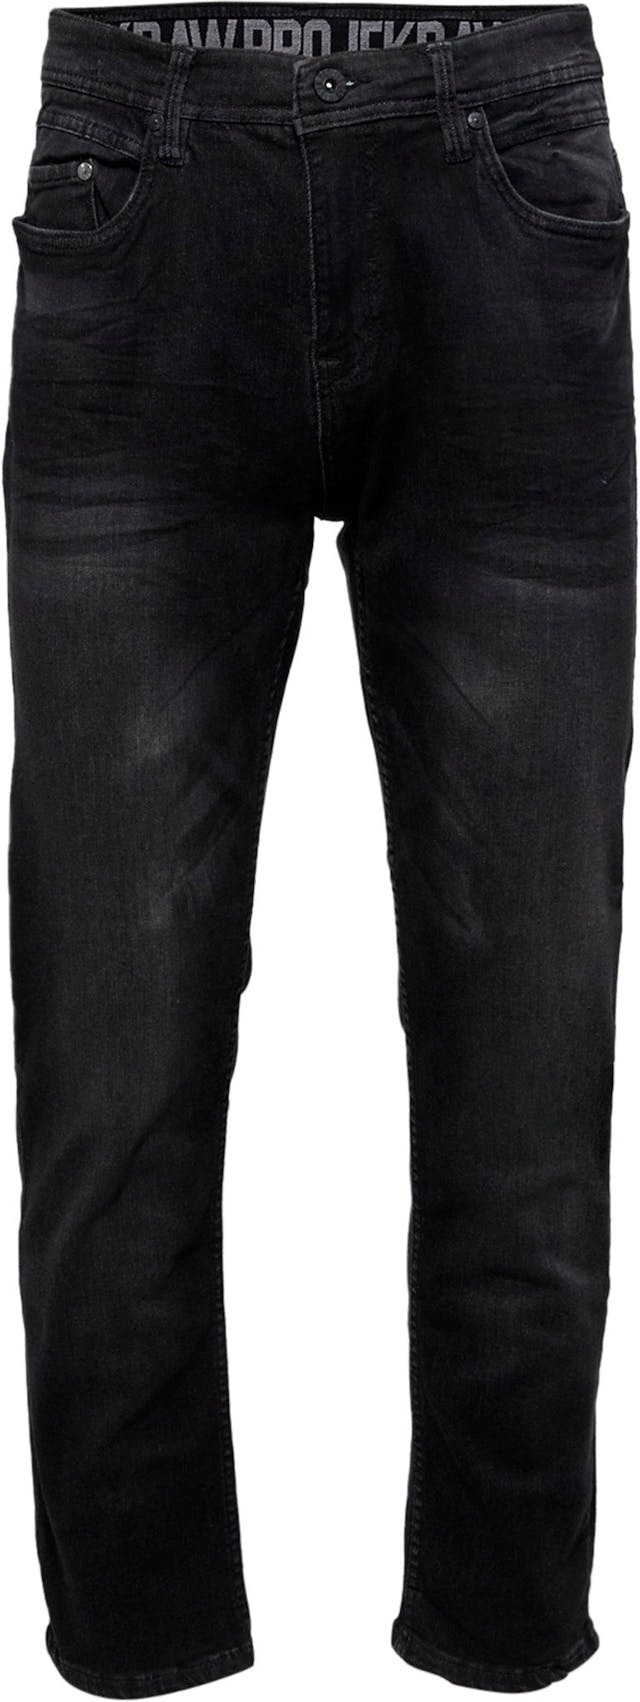 Product image for 5-Pocket Retro Tapered Jeans - Men's